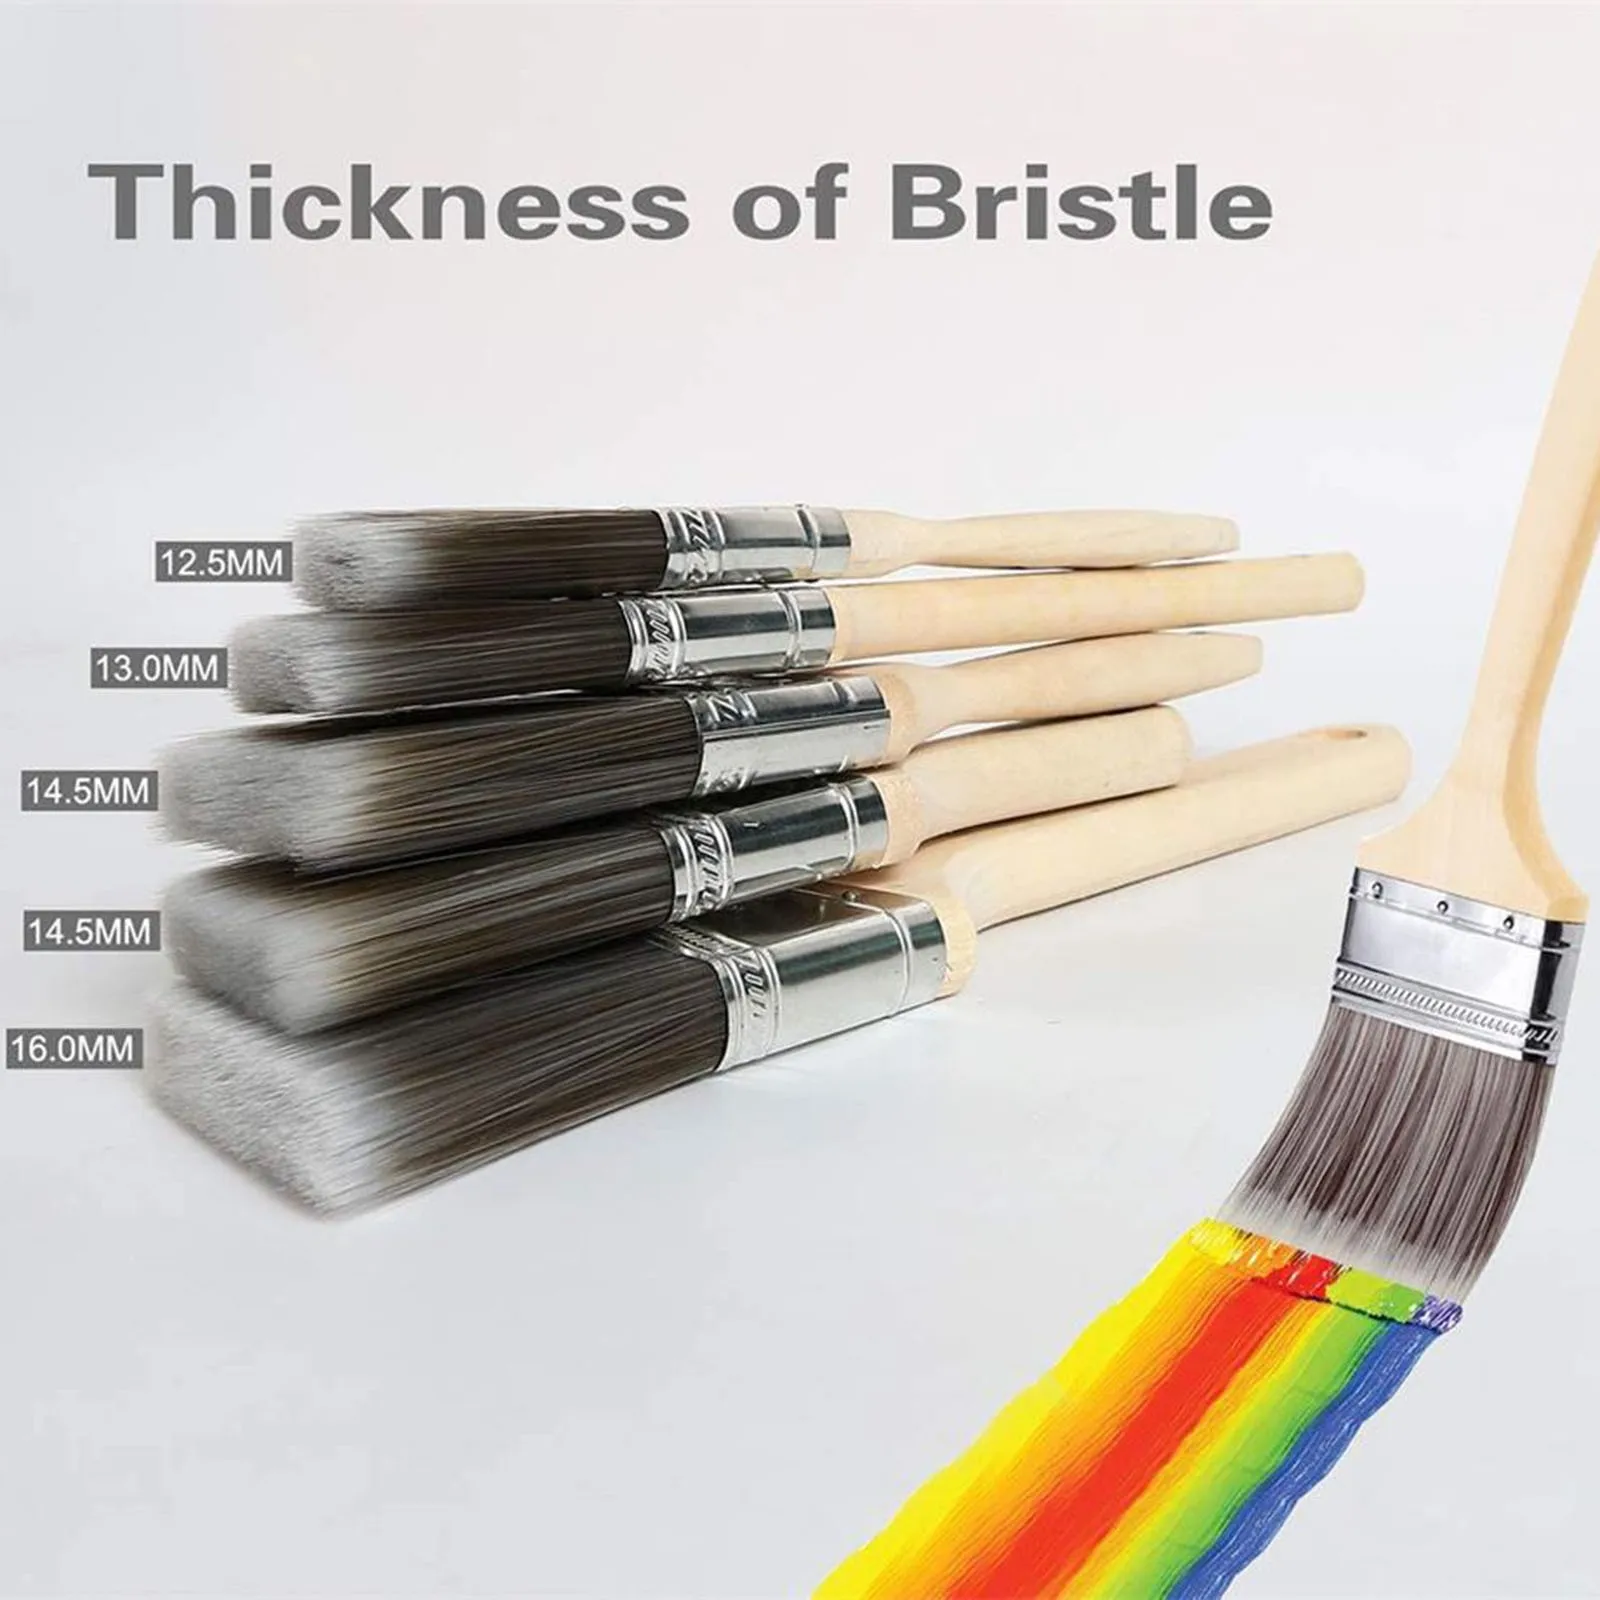 High Quality Nylon Paint Brush Different Size Wooden Handle Watercolor Brushes For Acrylic Oil Painting School Art Supplies small paint brushes